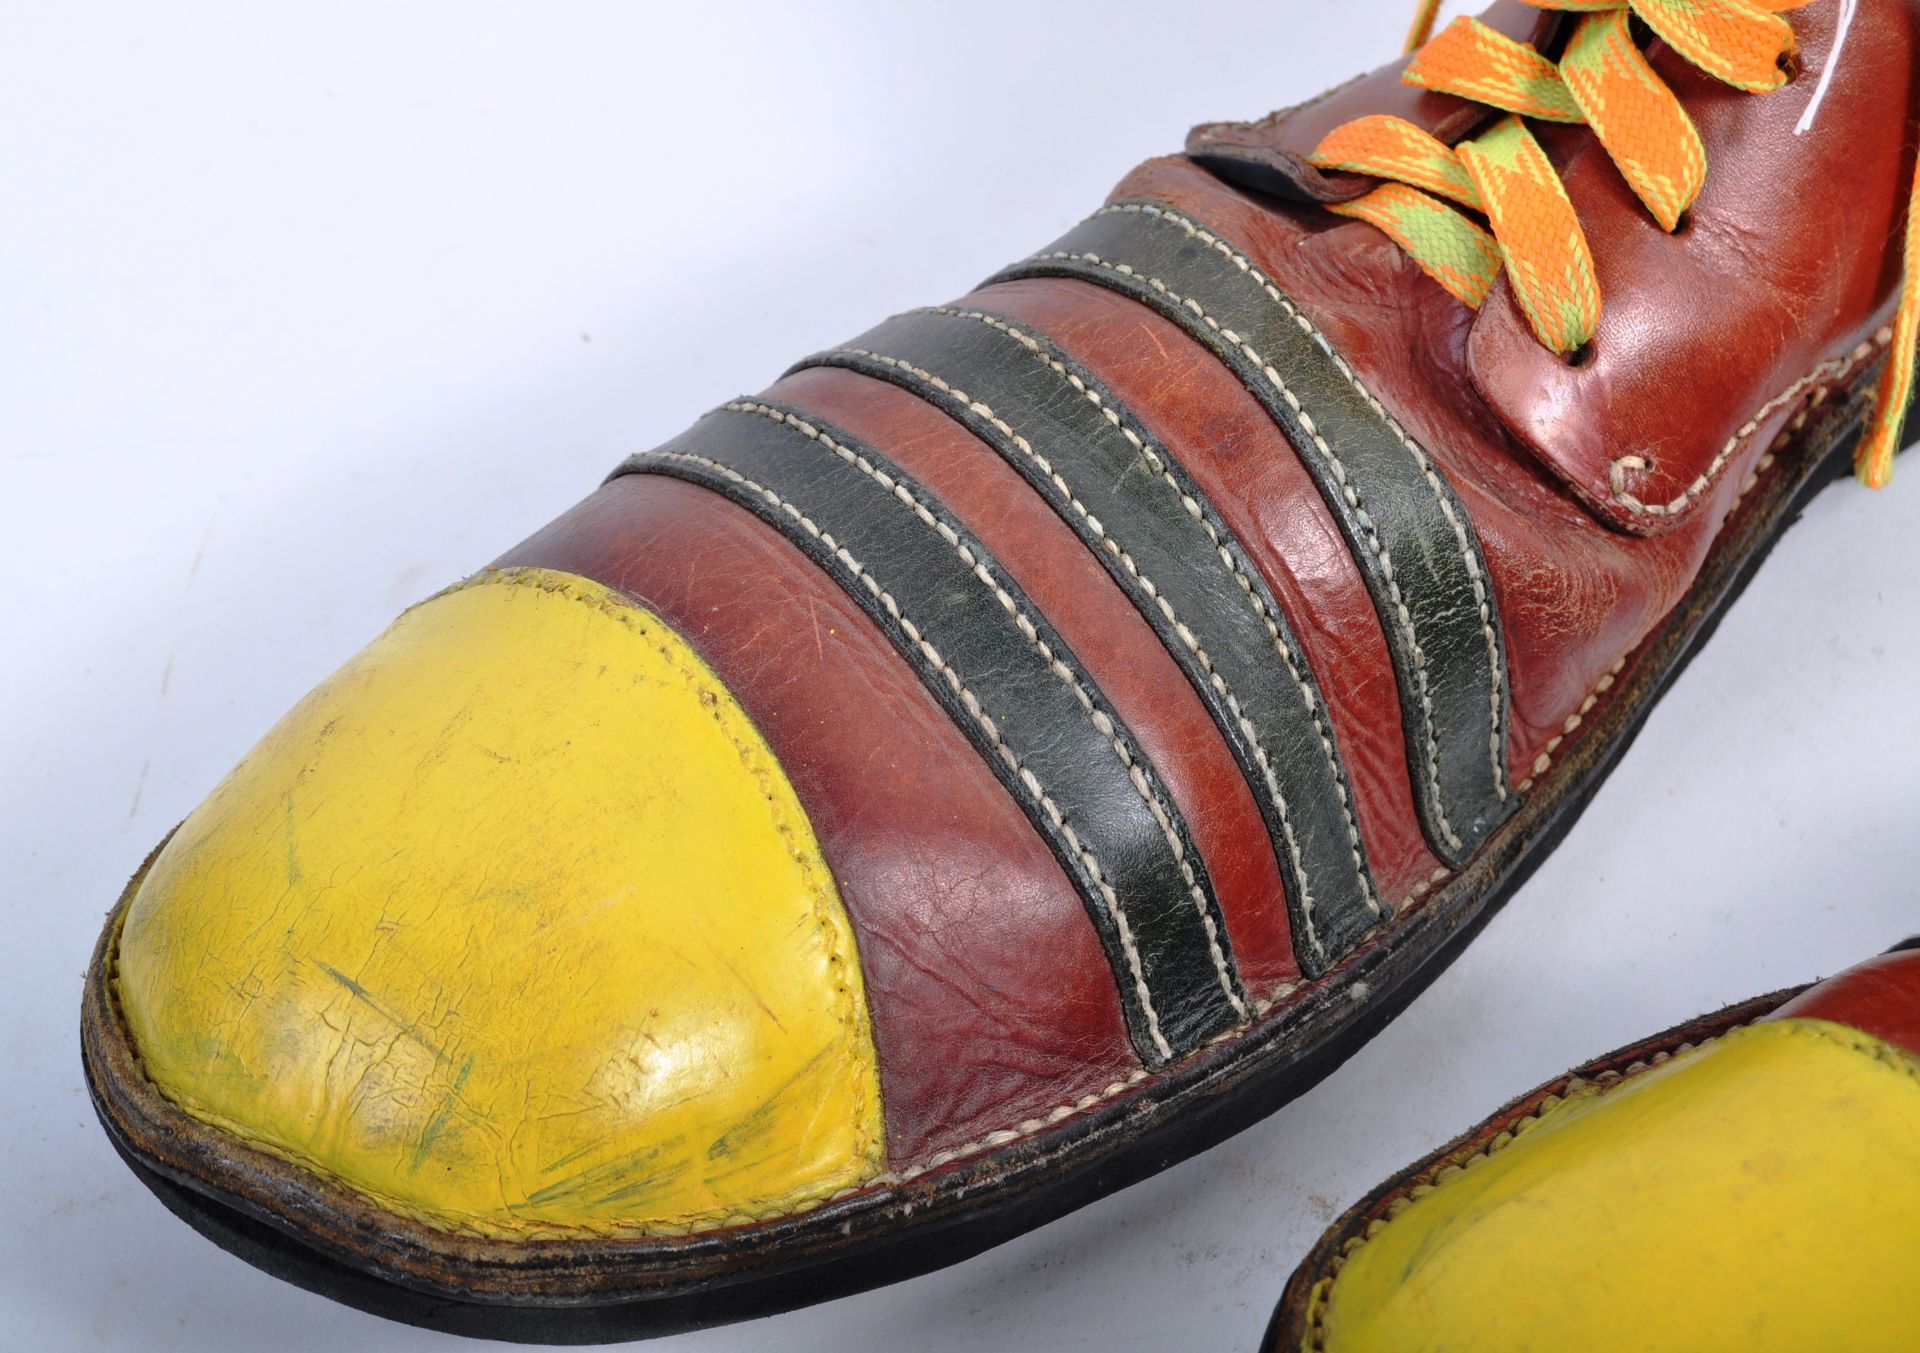 PAIR OF VINTAGE 20TH CENTURY OVERSIZED CLOWN SHOES - Image 2 of 5